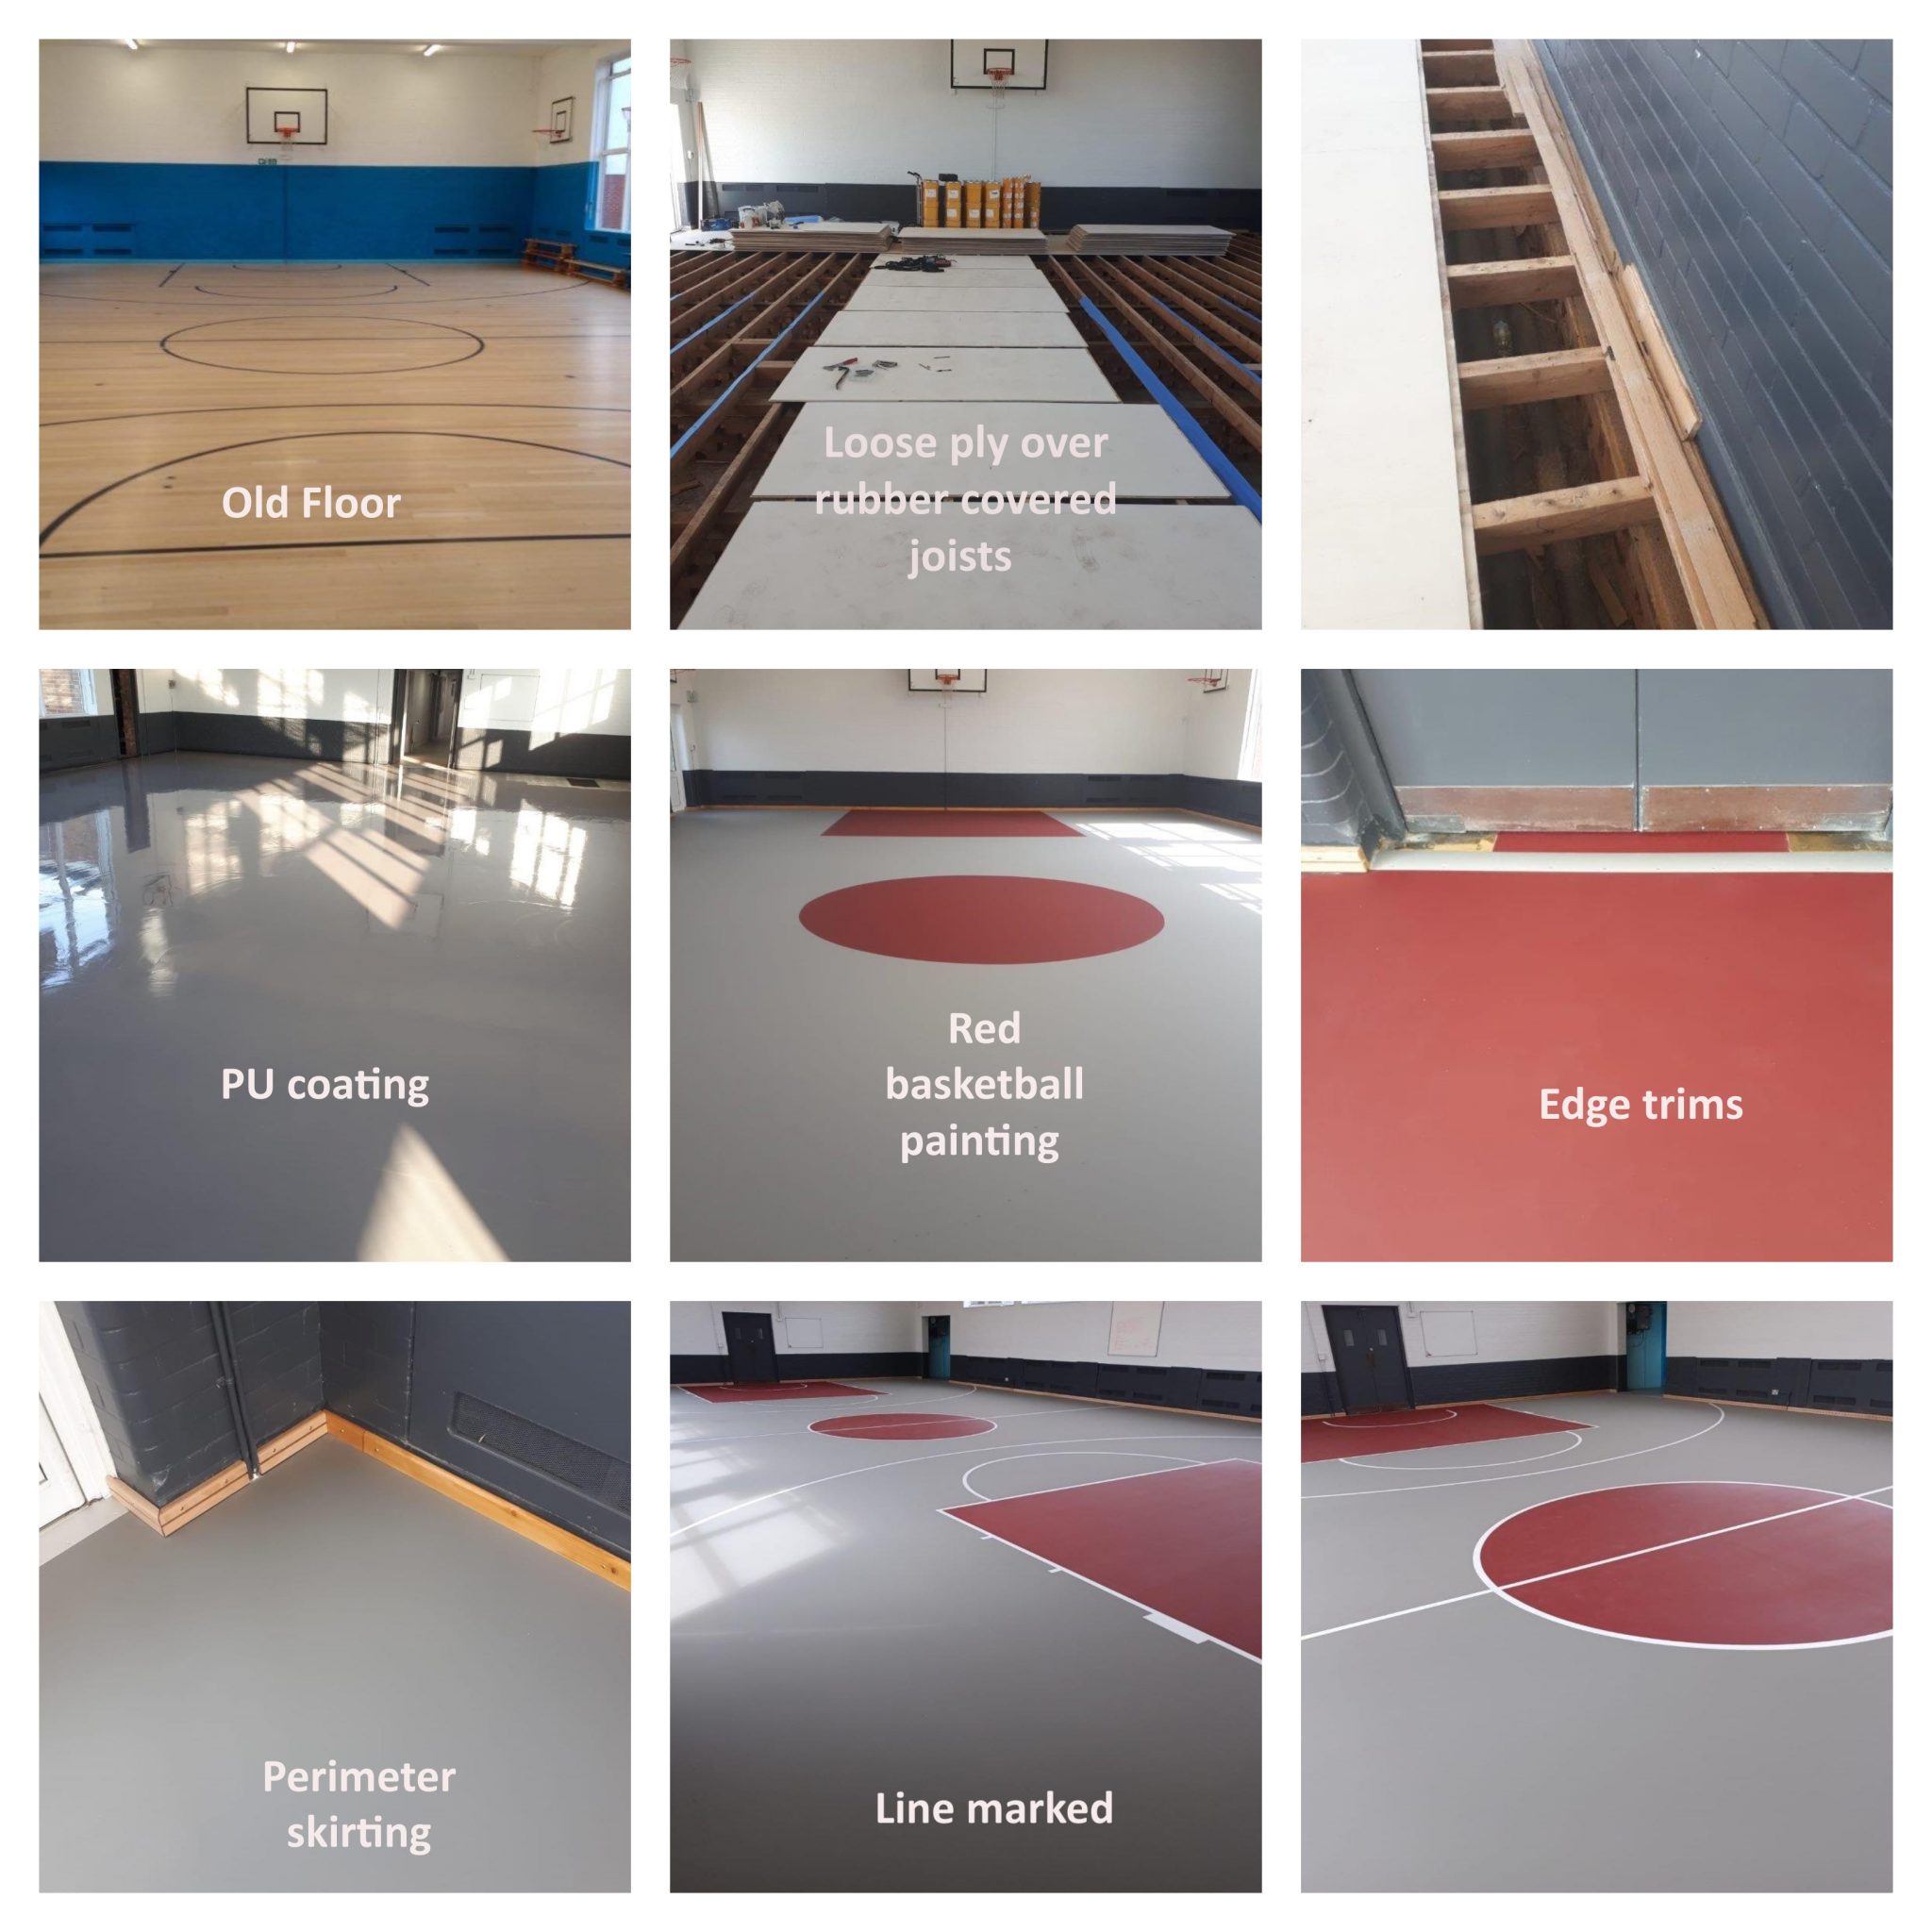 Supply and installation of our Pulastic Elite Comfort 20 ONE (UNO 32) sports surfacing system with plywood undercarriage along with Skirting Boards & Court Markings.